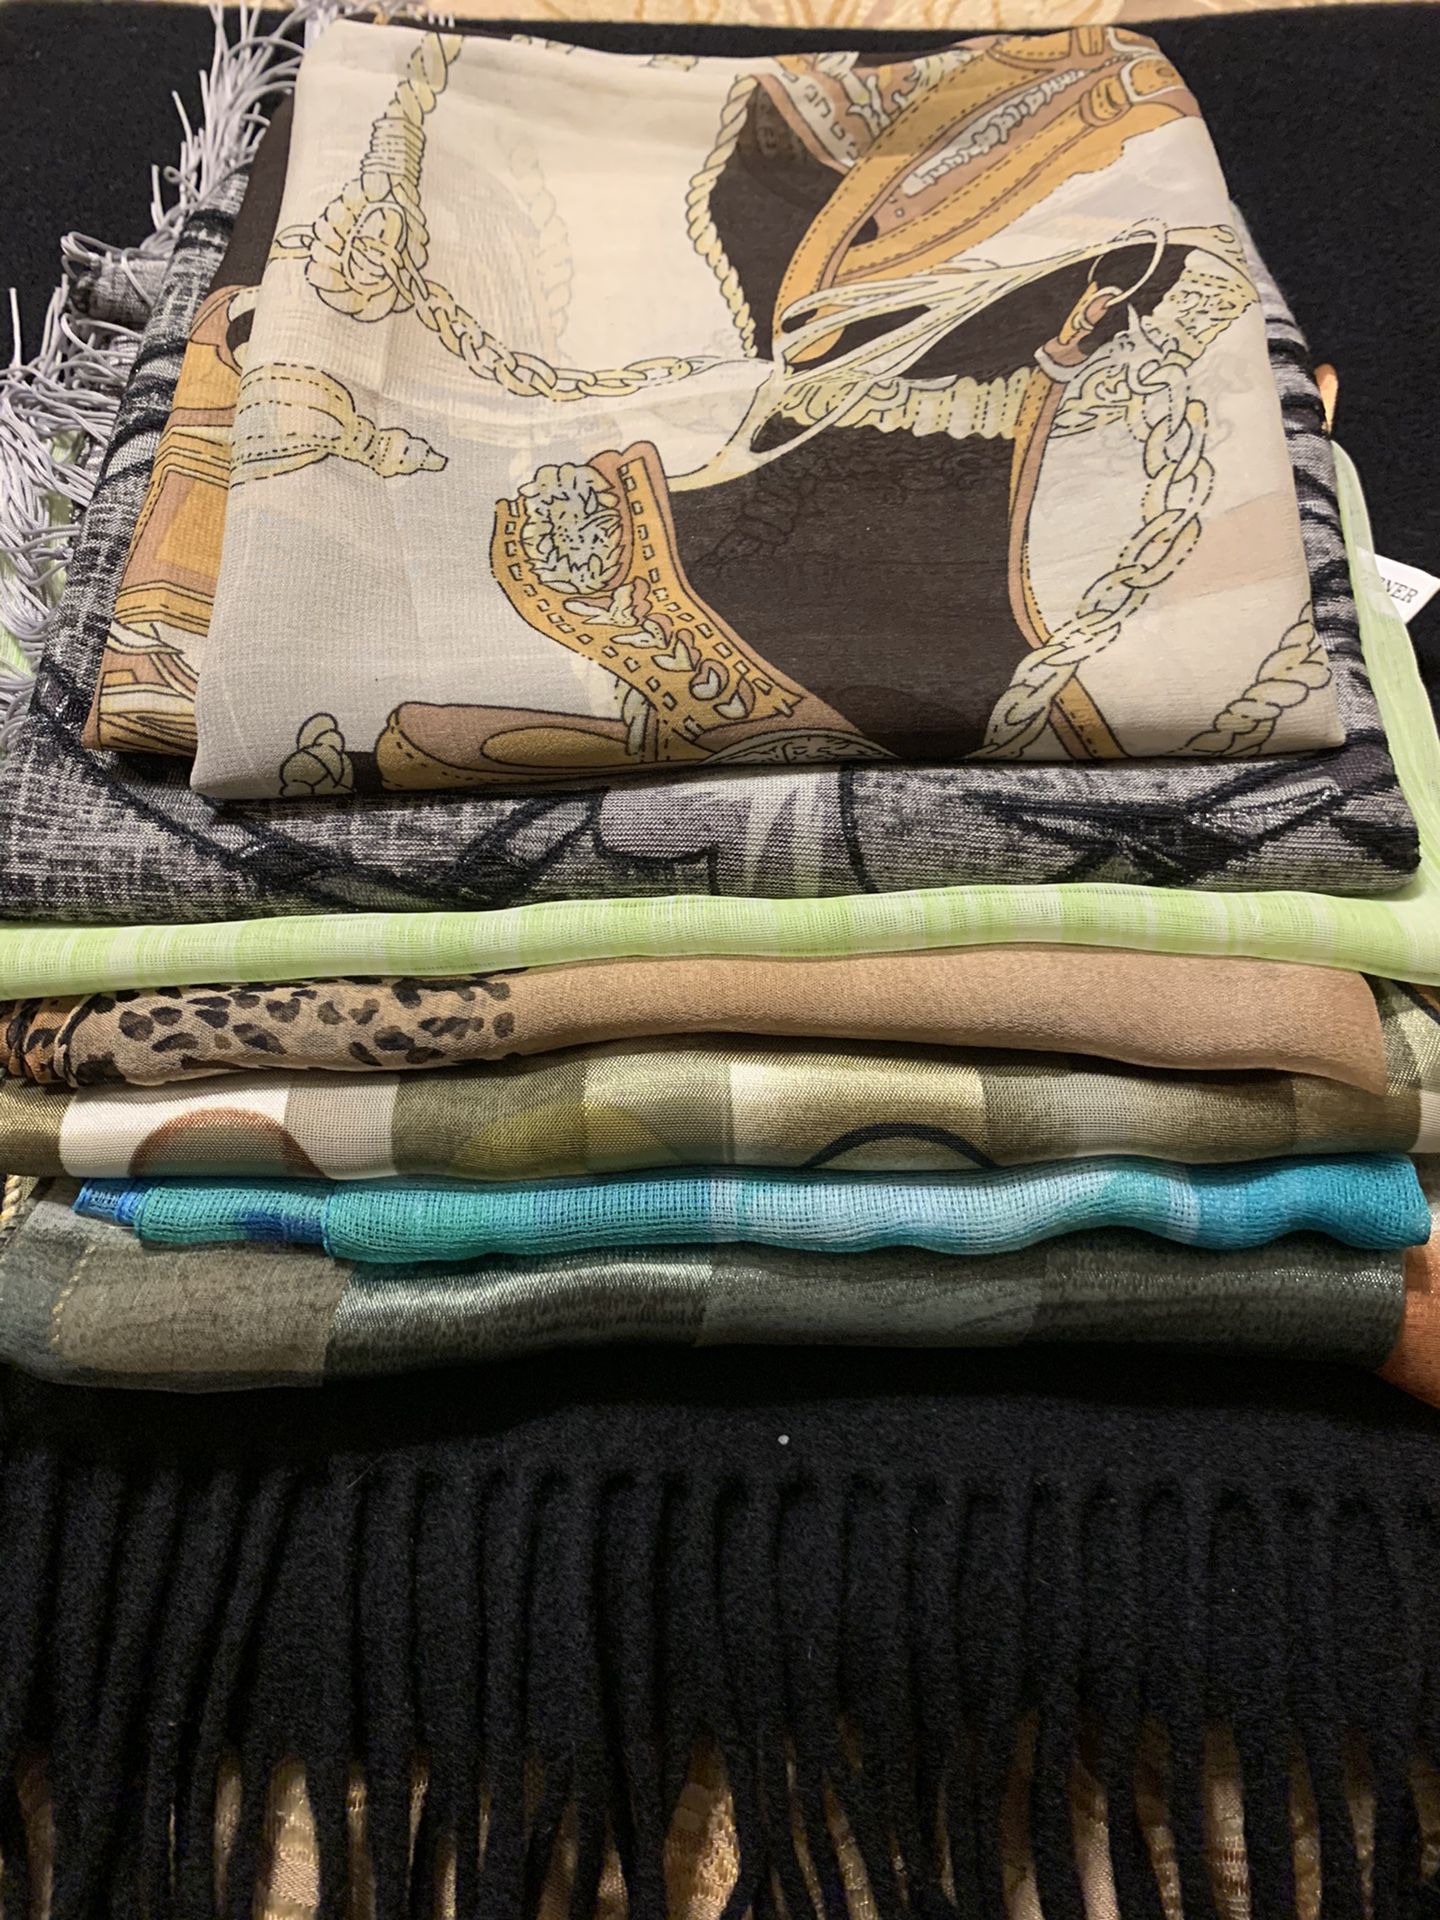 All 7 Scarf i Sale For $45